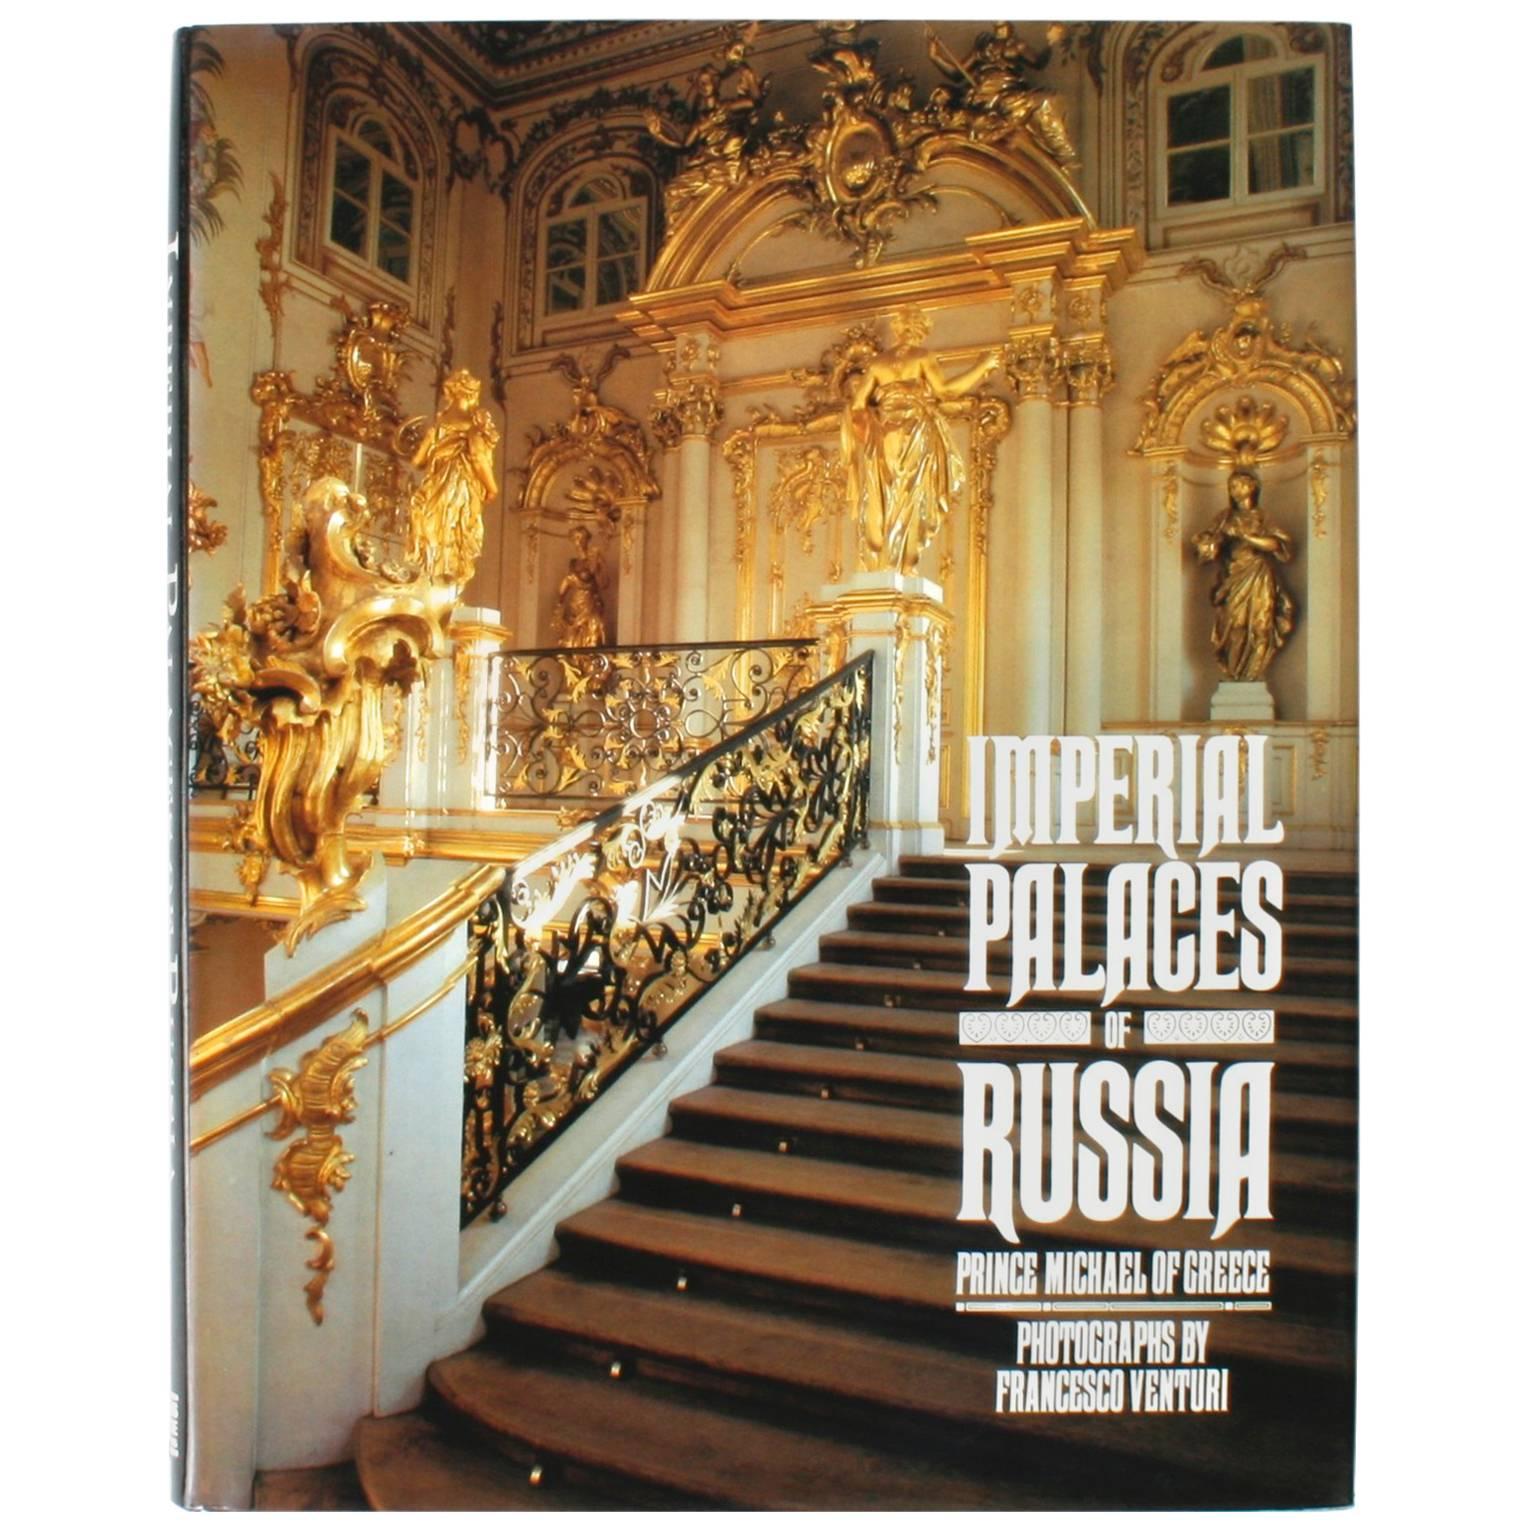 Imperial Palaces of Russia by Prince Michael of Greece, First Edition